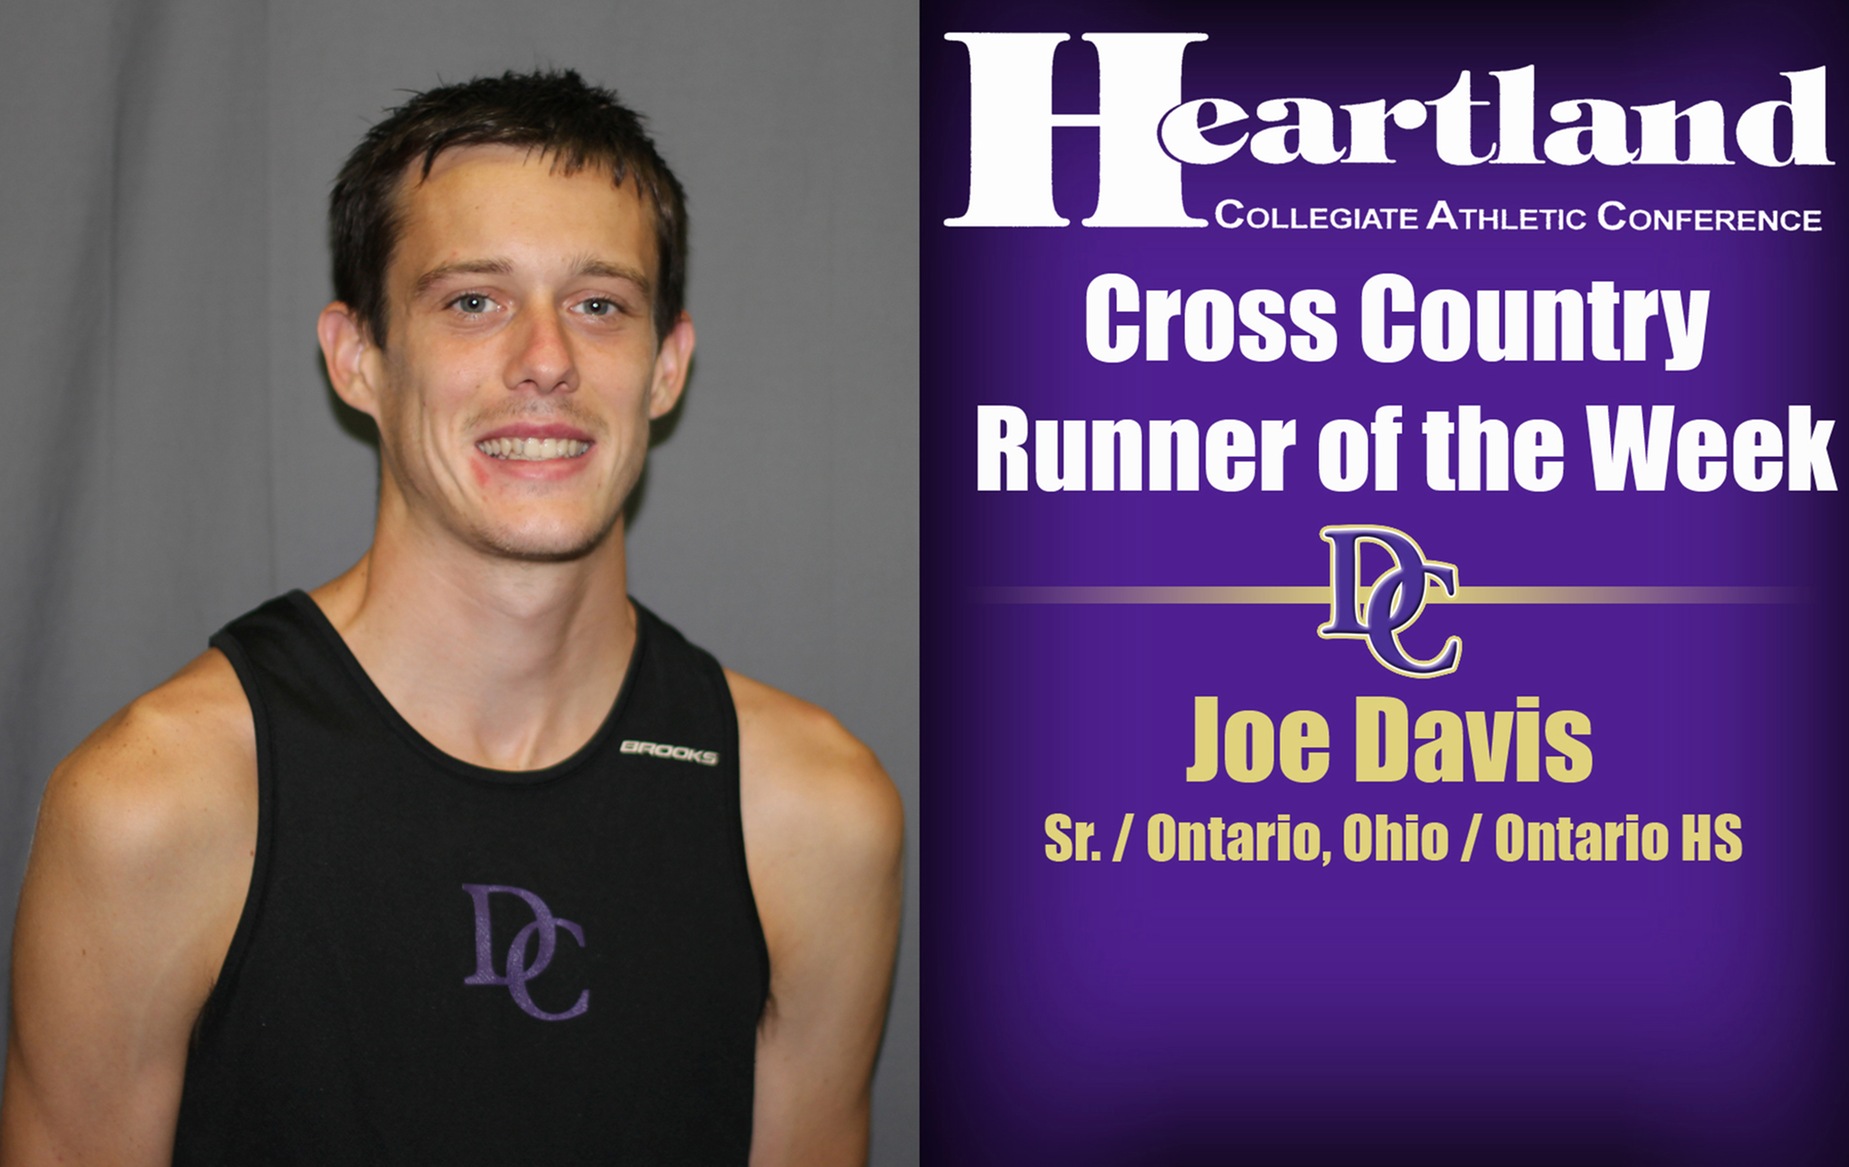 Davis grabs first HCAC runner of the week for DC cross country